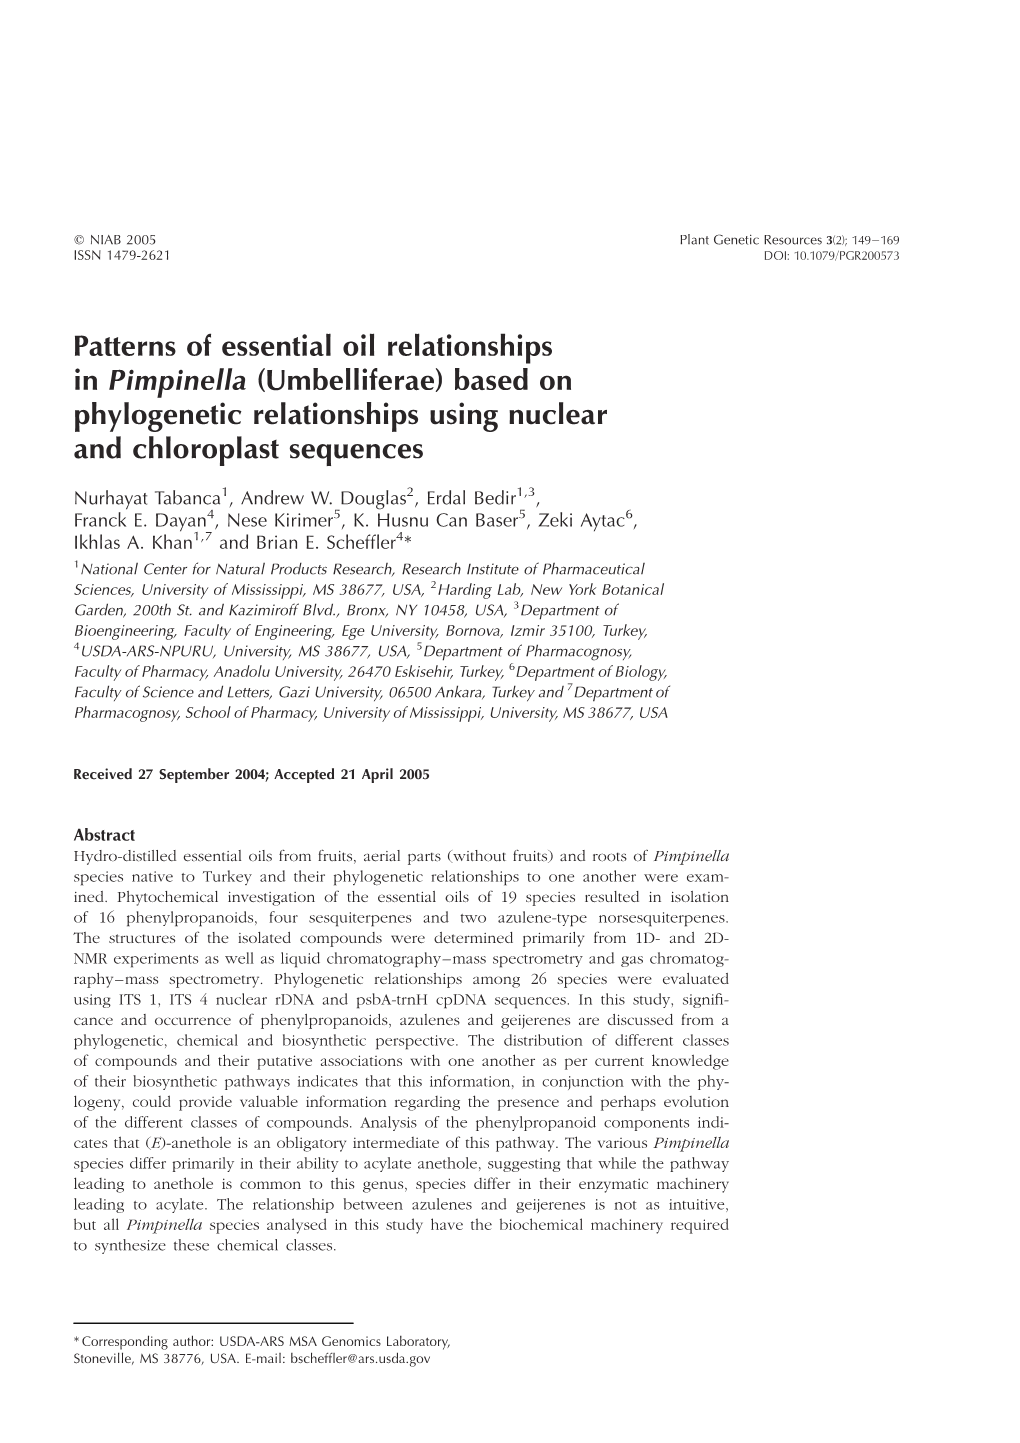 Patterns of Essential Oil Relationships in Pimpinella (Umbelliferae) Based on Phylogenetic Relationships Using Nuclear and Chloroplast Sequences